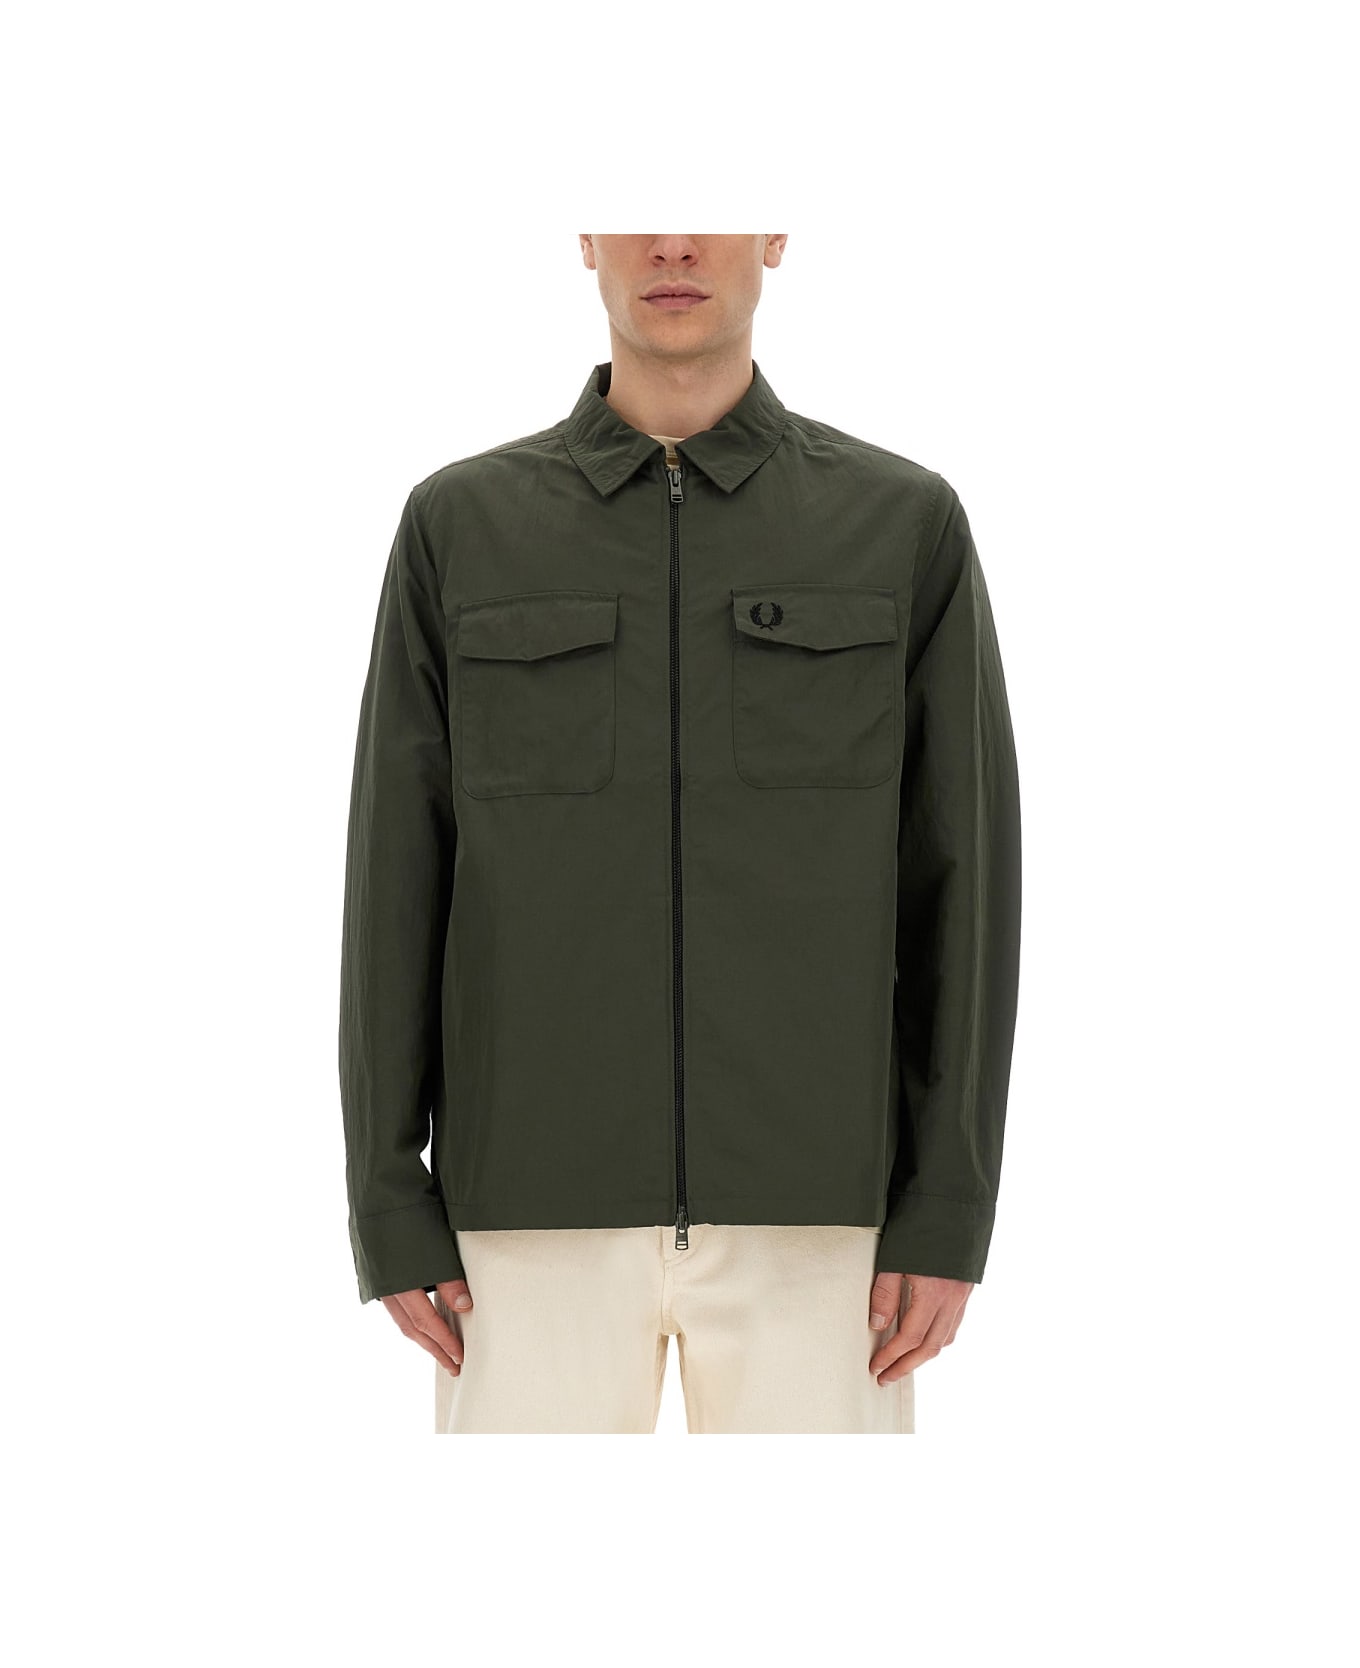 Fred Perry Shirt Jacket - MILITARY GREEN ジャケット